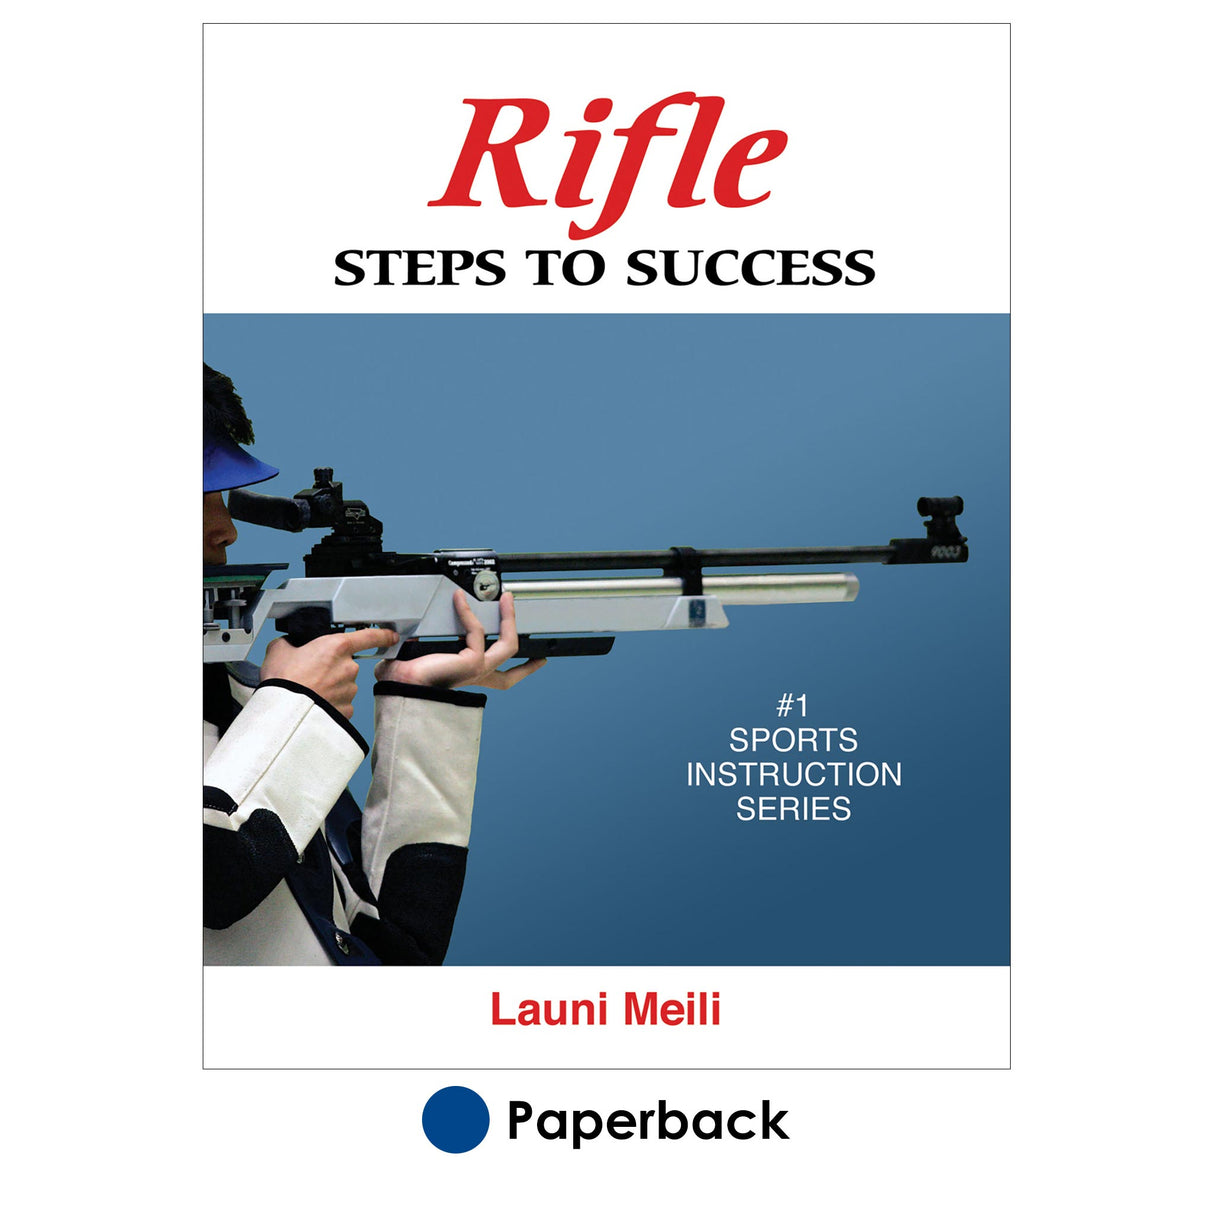 Rifle: Steps to Success